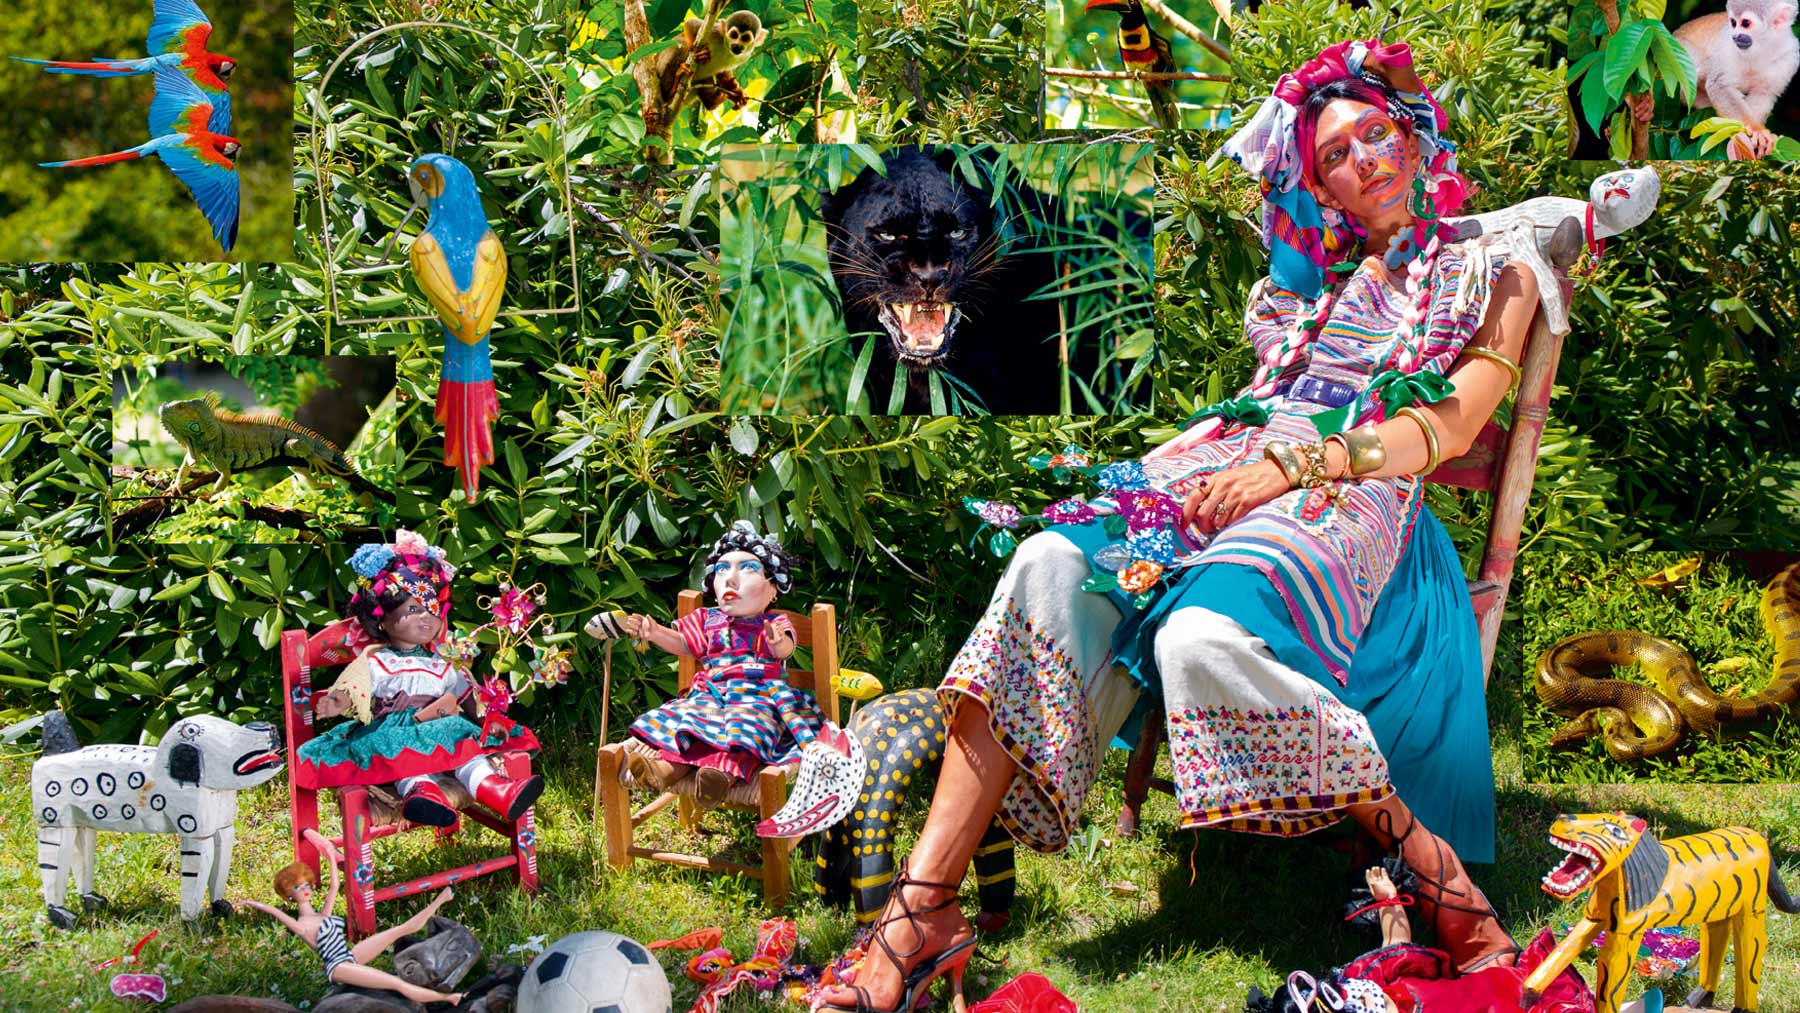 Woman in a chair surrounded by plants and dolls